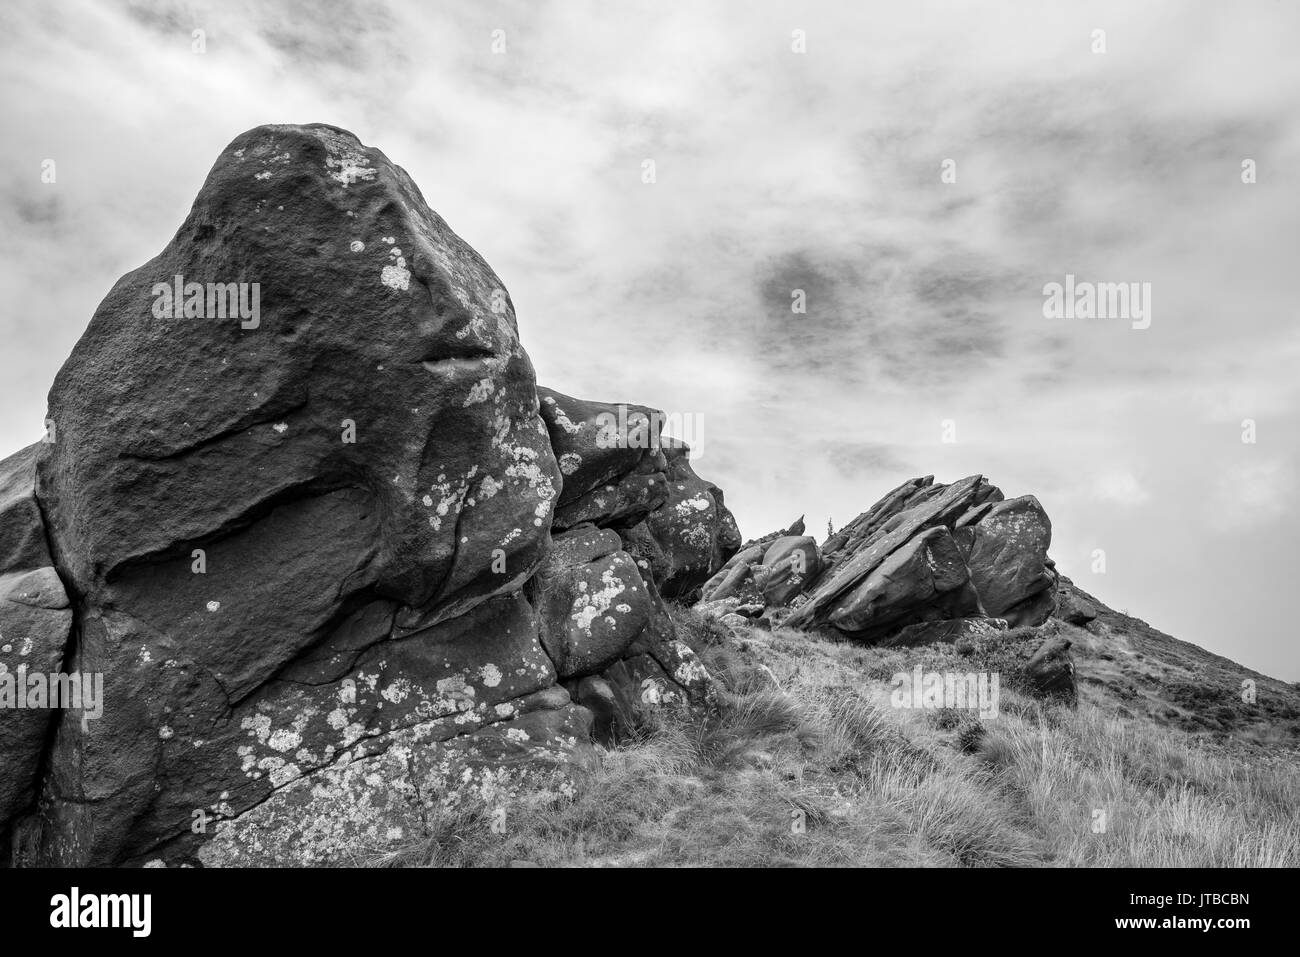 Dramatic rocky landscape at Ramshaw rocks in the Peak District national park, Staffordshire, England. Stock Photo